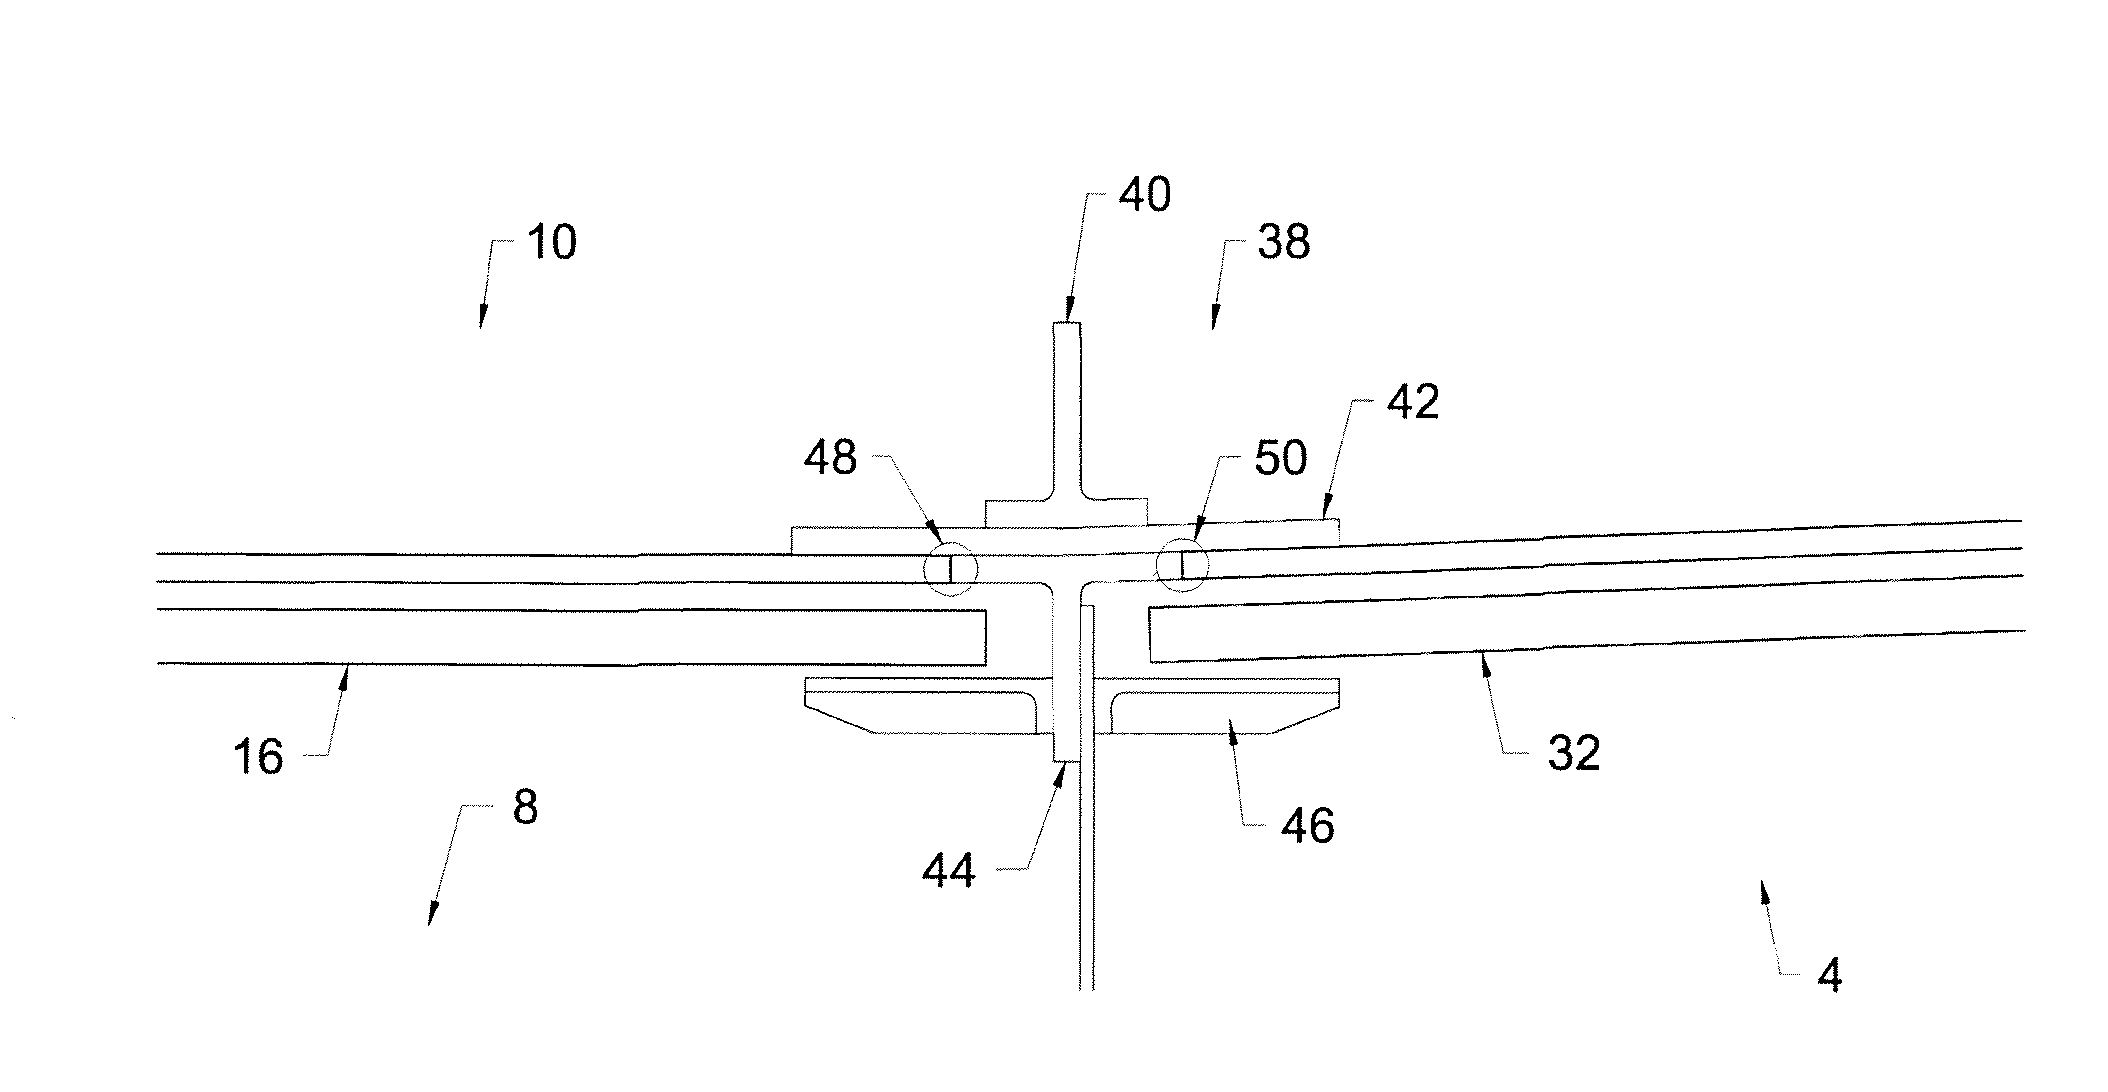 Stable grounding system to avoid catastrophic electrical failures in fiber-reinforced composite aircraft